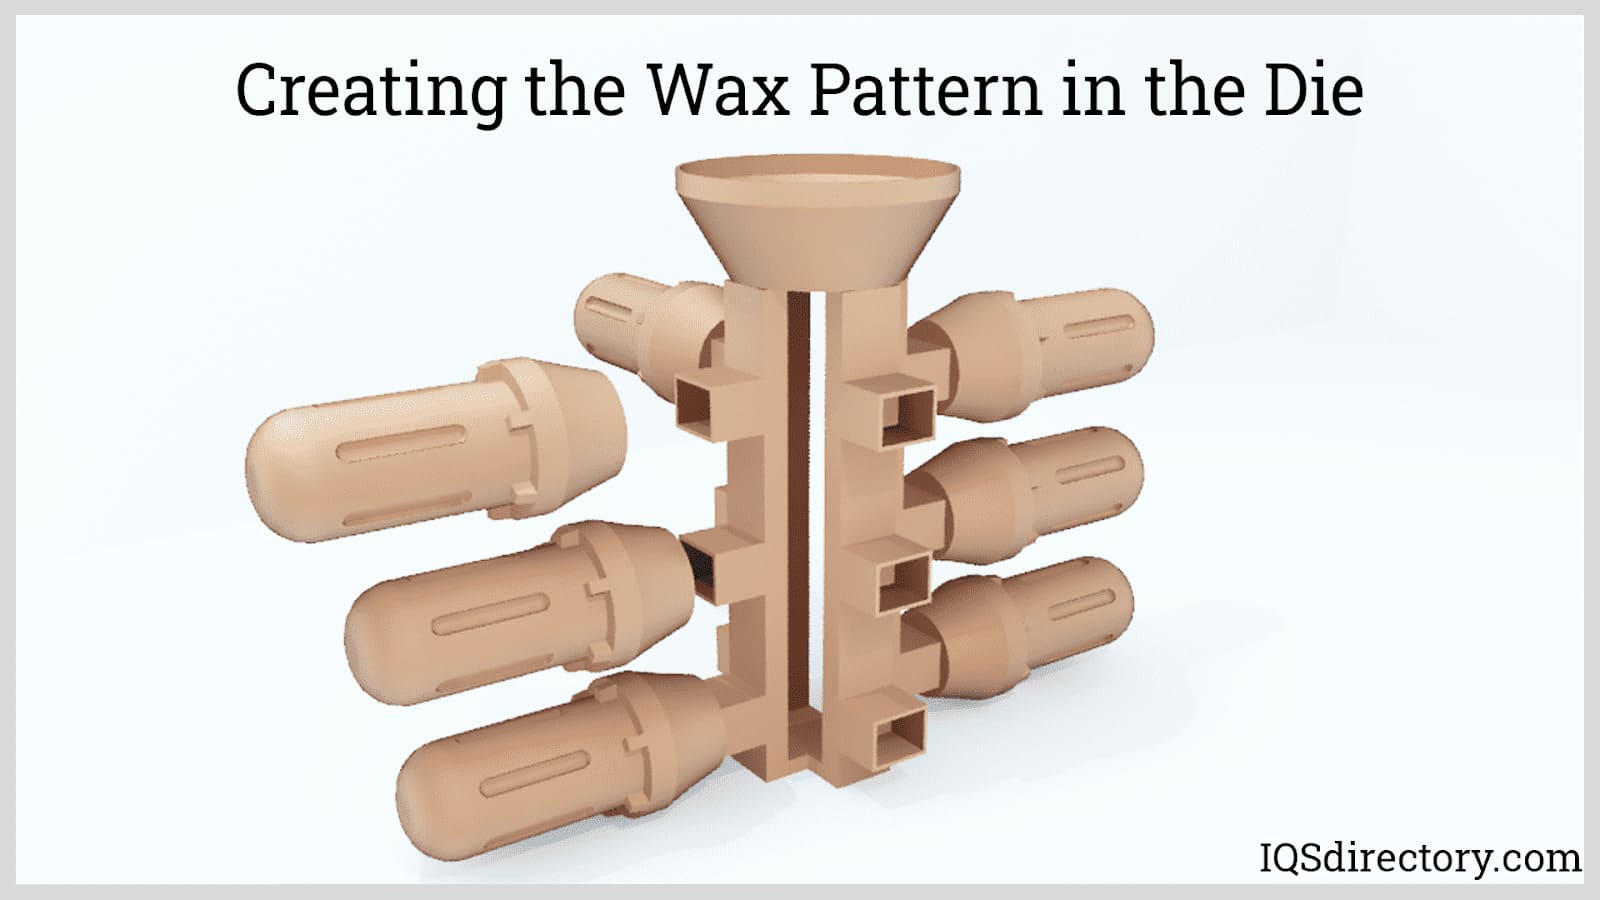 Creating the Wax Pattern in the Die